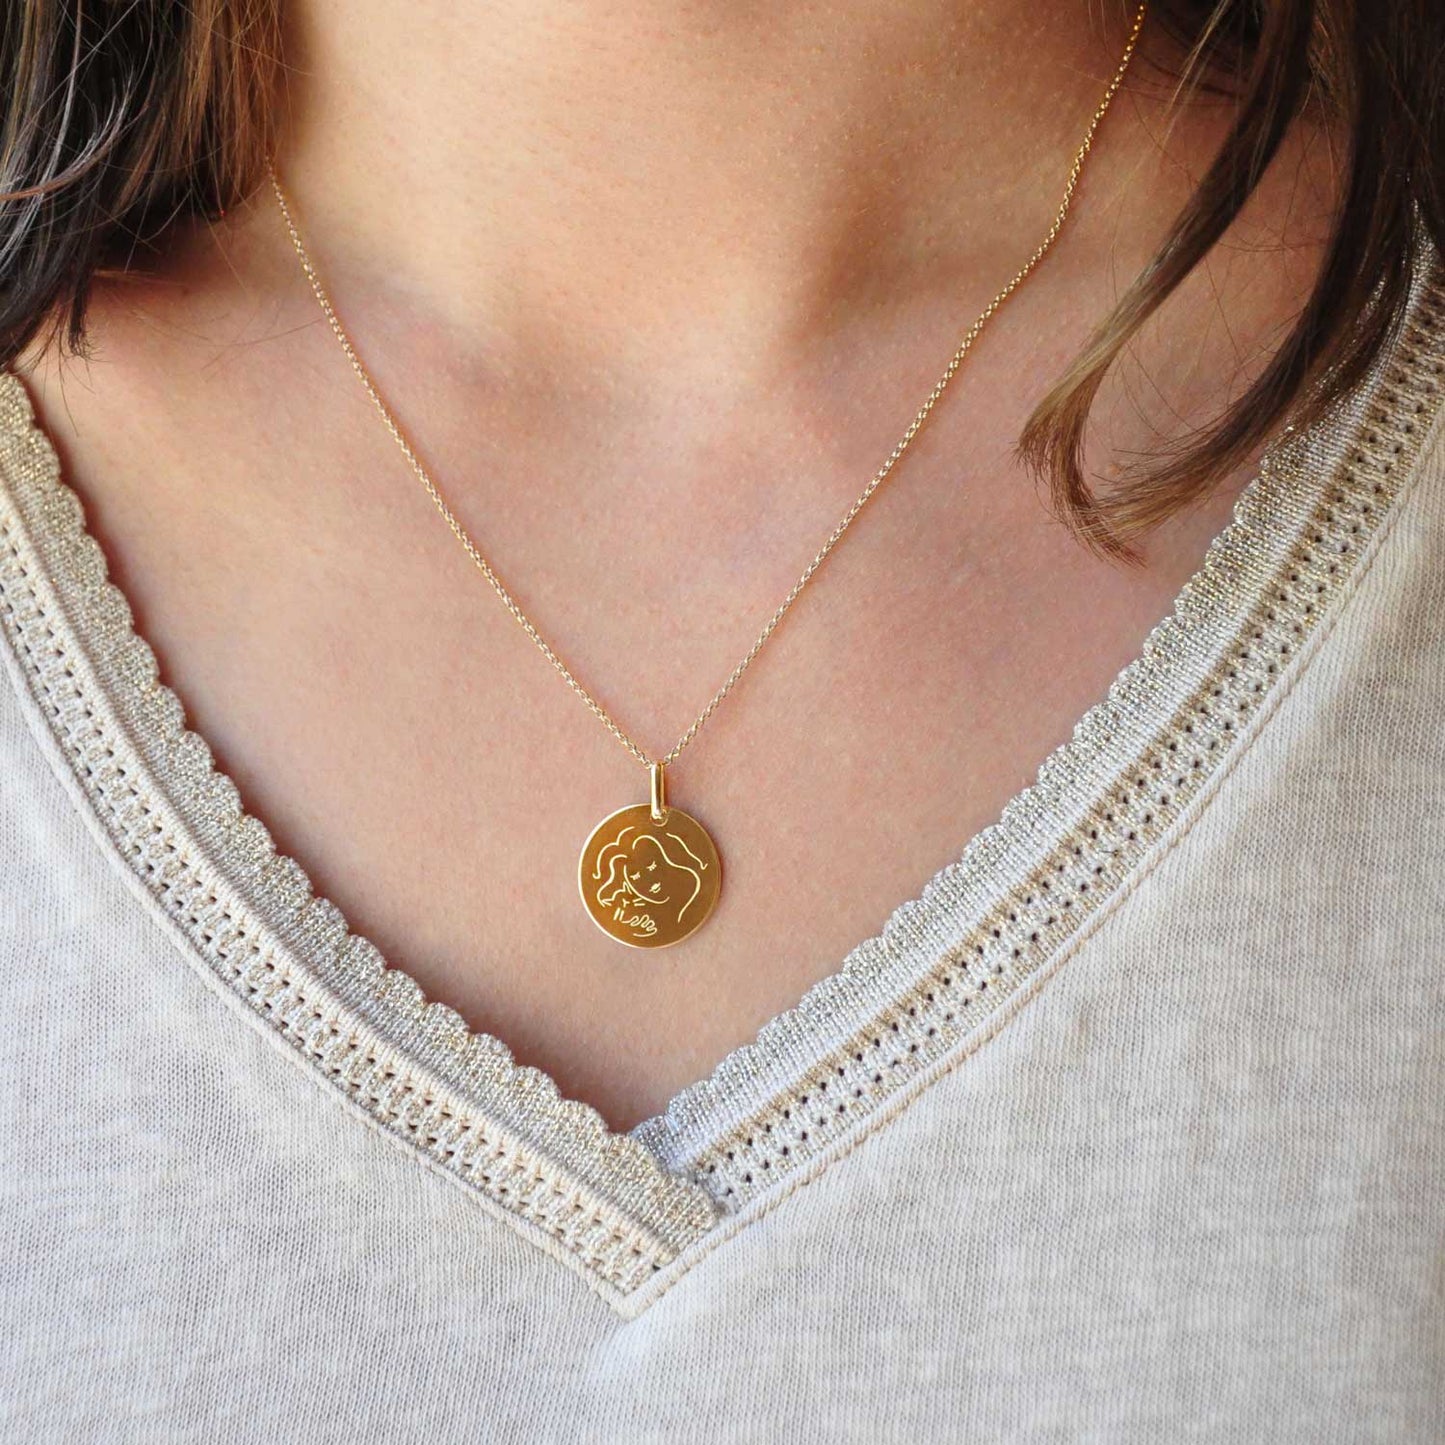 Muze 18k gold vermeil cat medal necklace, art inspired jewelry, dainty talisman symbol of love and affection. Meaningful sentimental gift perfect for cat lovers or as a friendship gift.